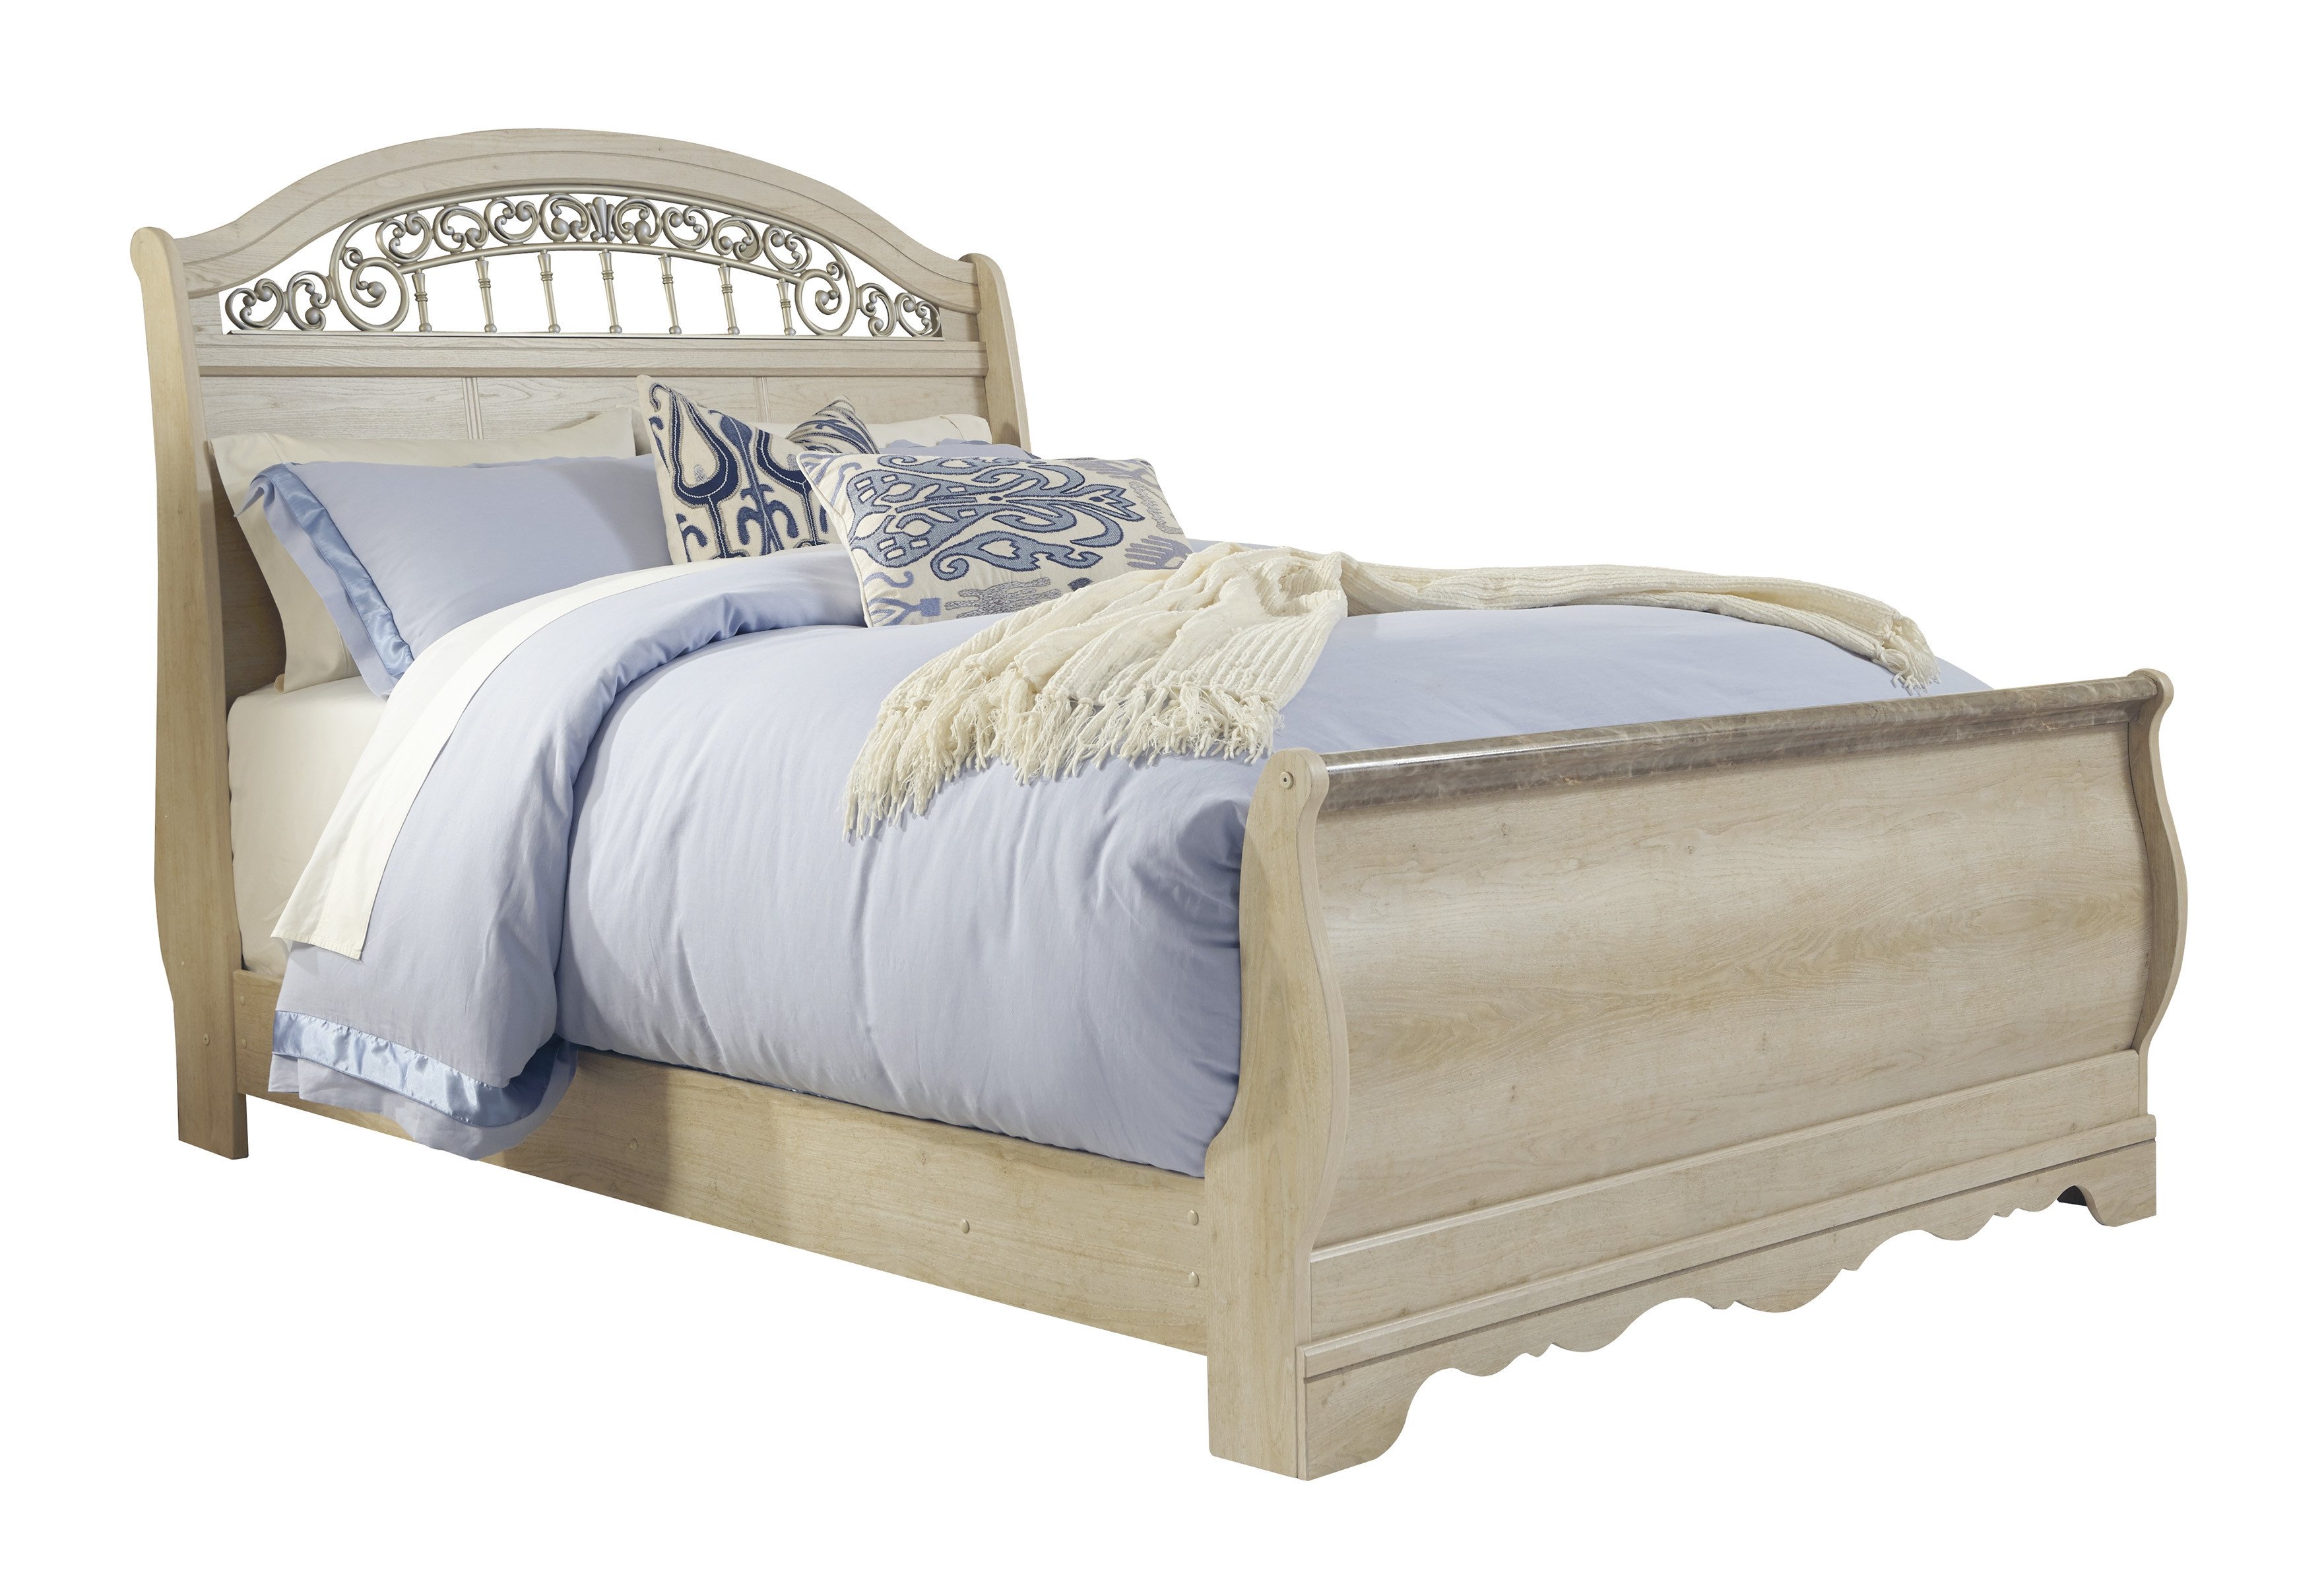 Ashley Catalina Bedroom Set Best Of ashley Furniture Catalina Queen Sleigh Bed